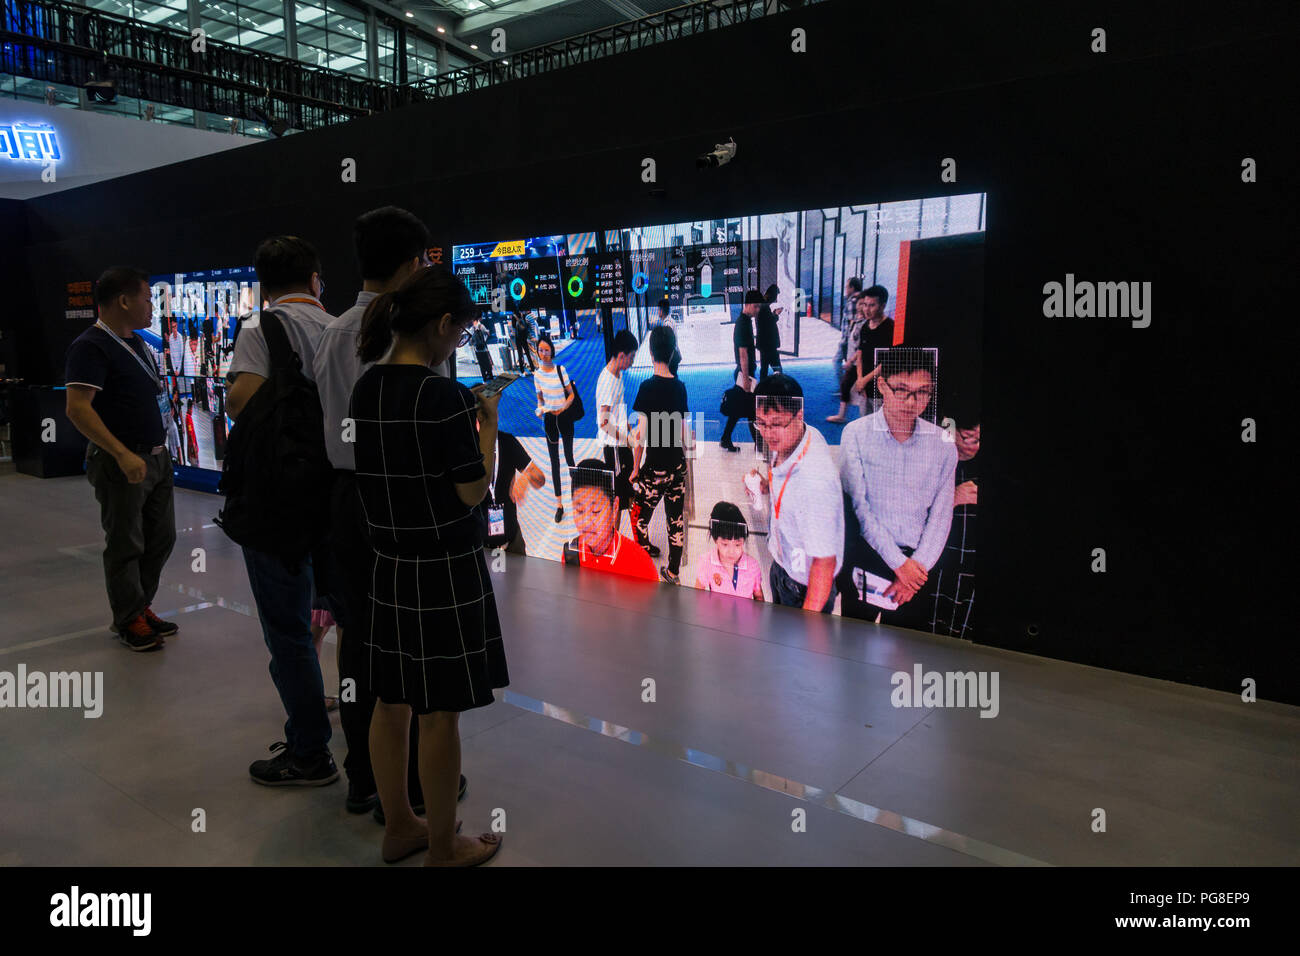 Face monitoring and surveillance technology exhibit at China Smart City Expo 2018 in Shenzhen, China. Stock Photo